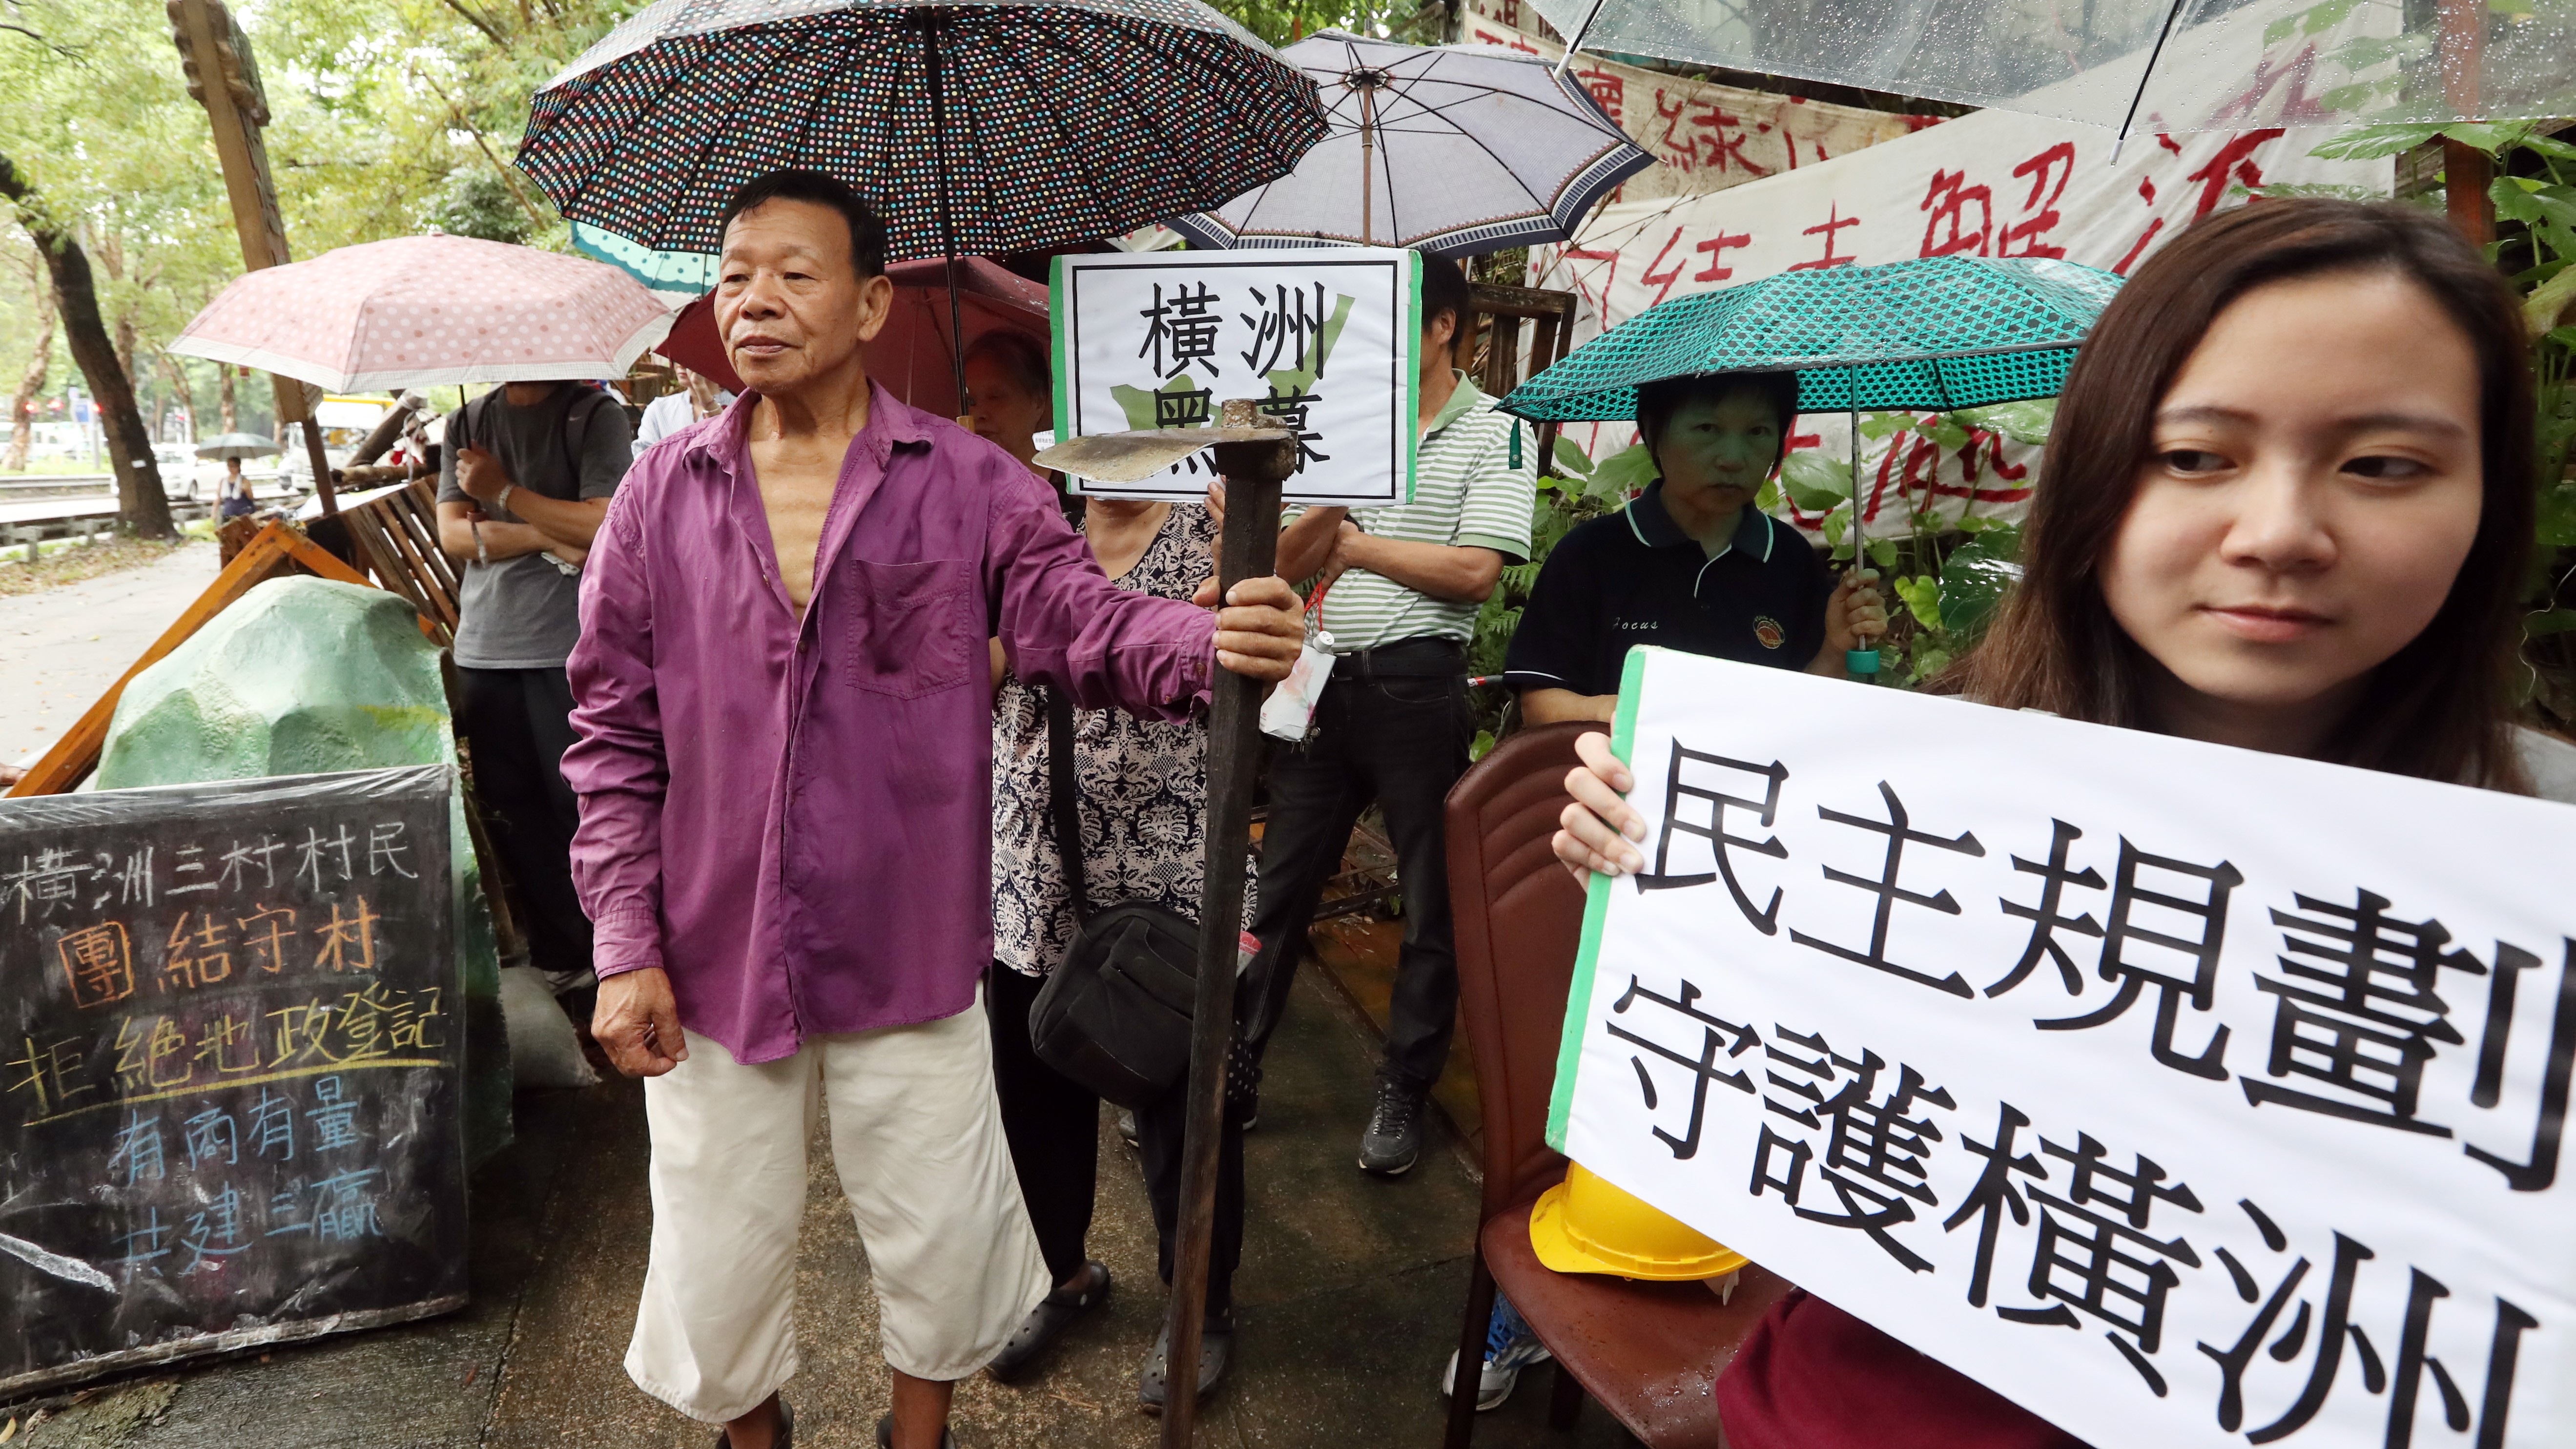 Wang Chau villagers protest outside the Yuen Long Government Offices. Photo: Edward Wong